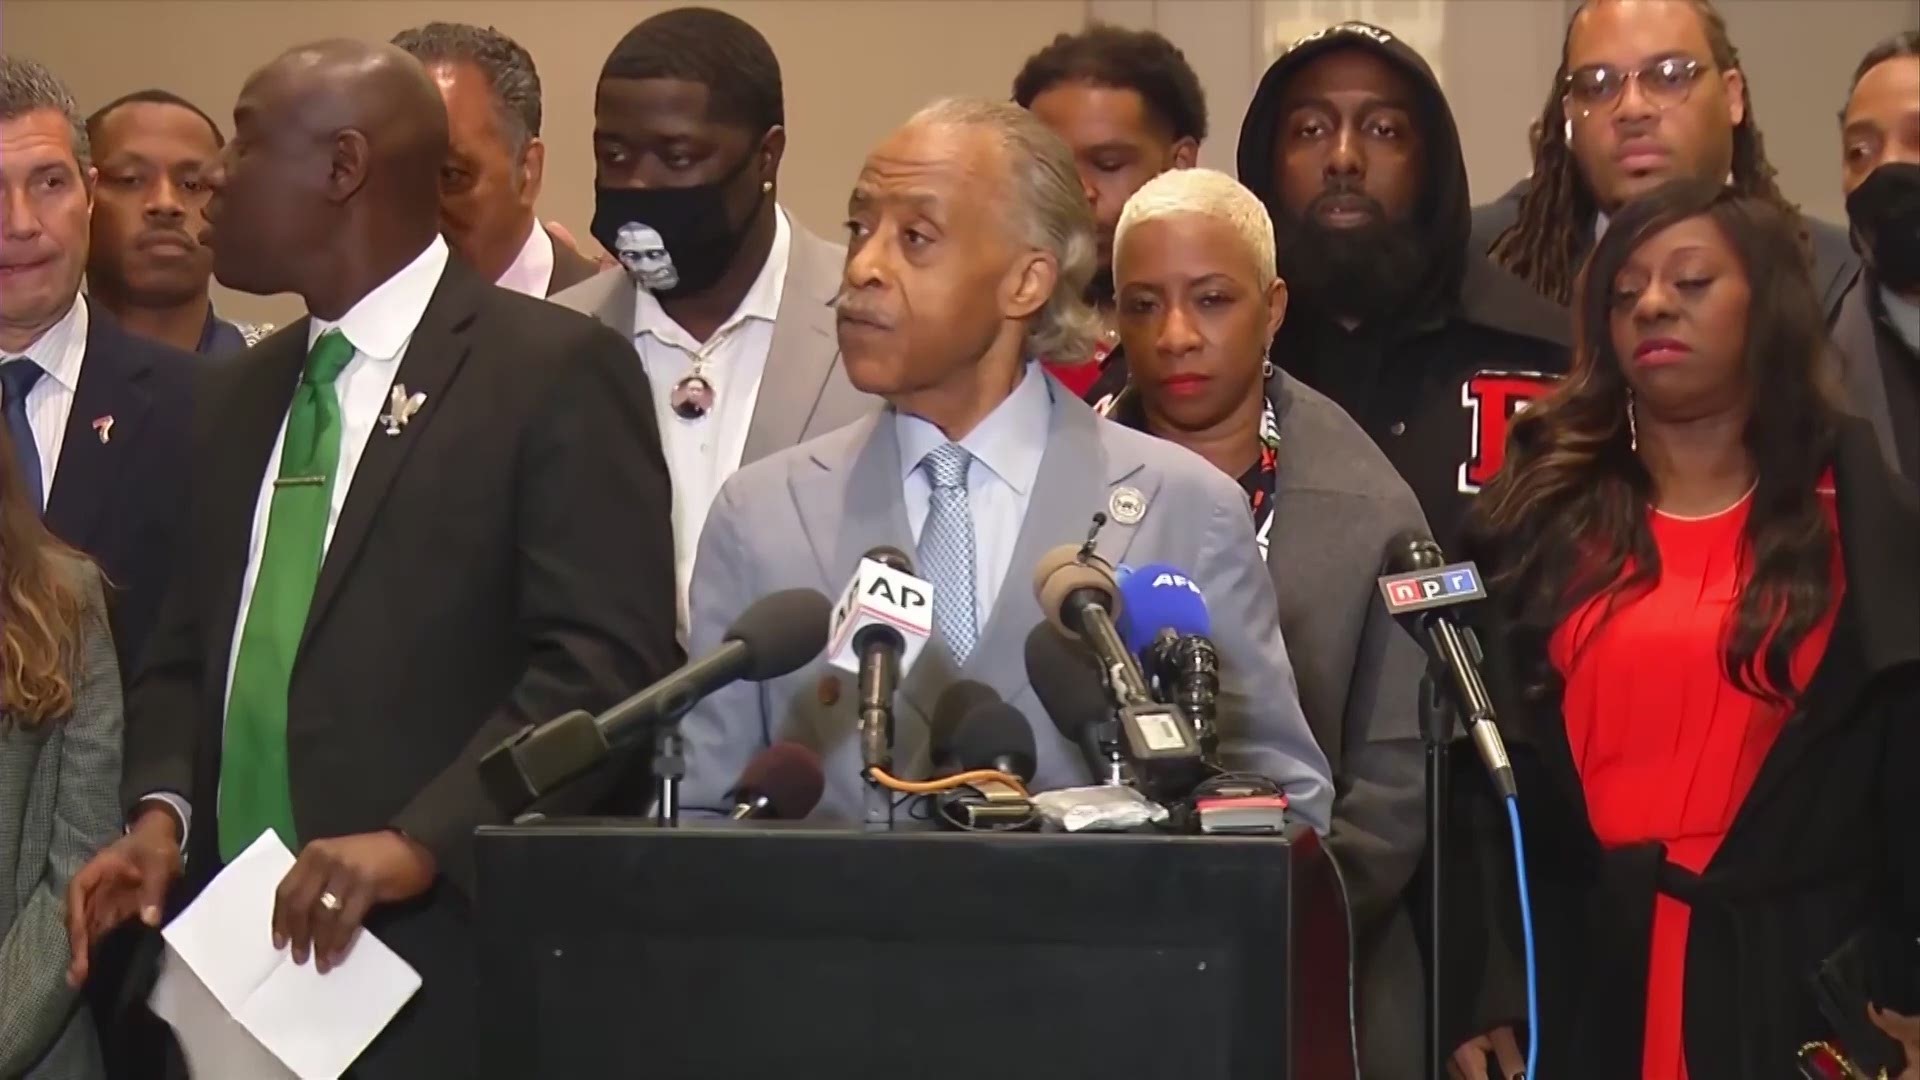 Rev. Al Sharpton reacted to the verdict in Derek Chauvin's trial for the murder of George Floyd.